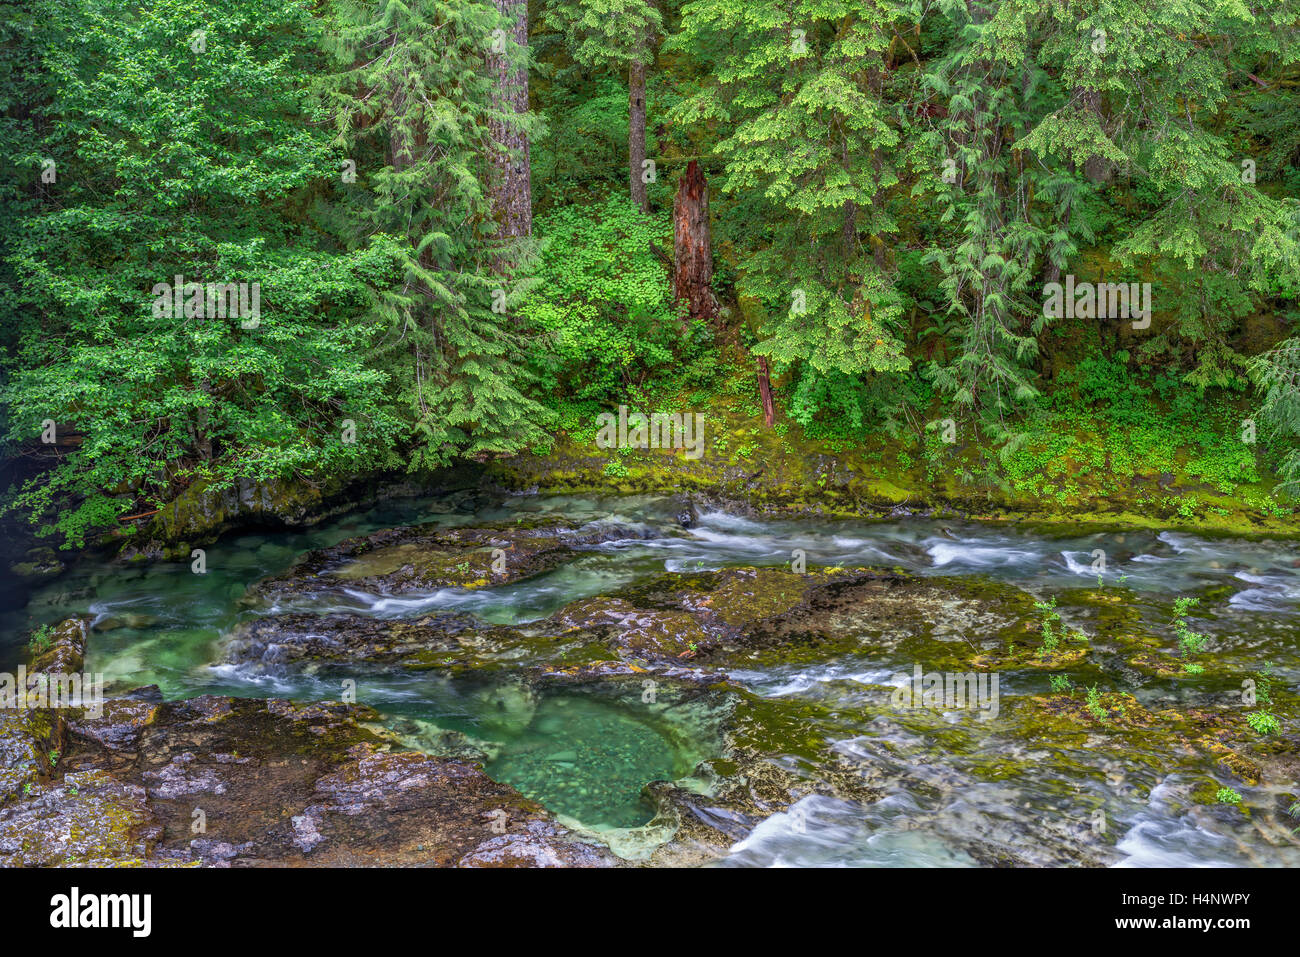 USA, Oregon, Willamette National Forest, Opal Creek Scenic Recreation Area, Little North Santiam River and coniferous forest. Stock Photo